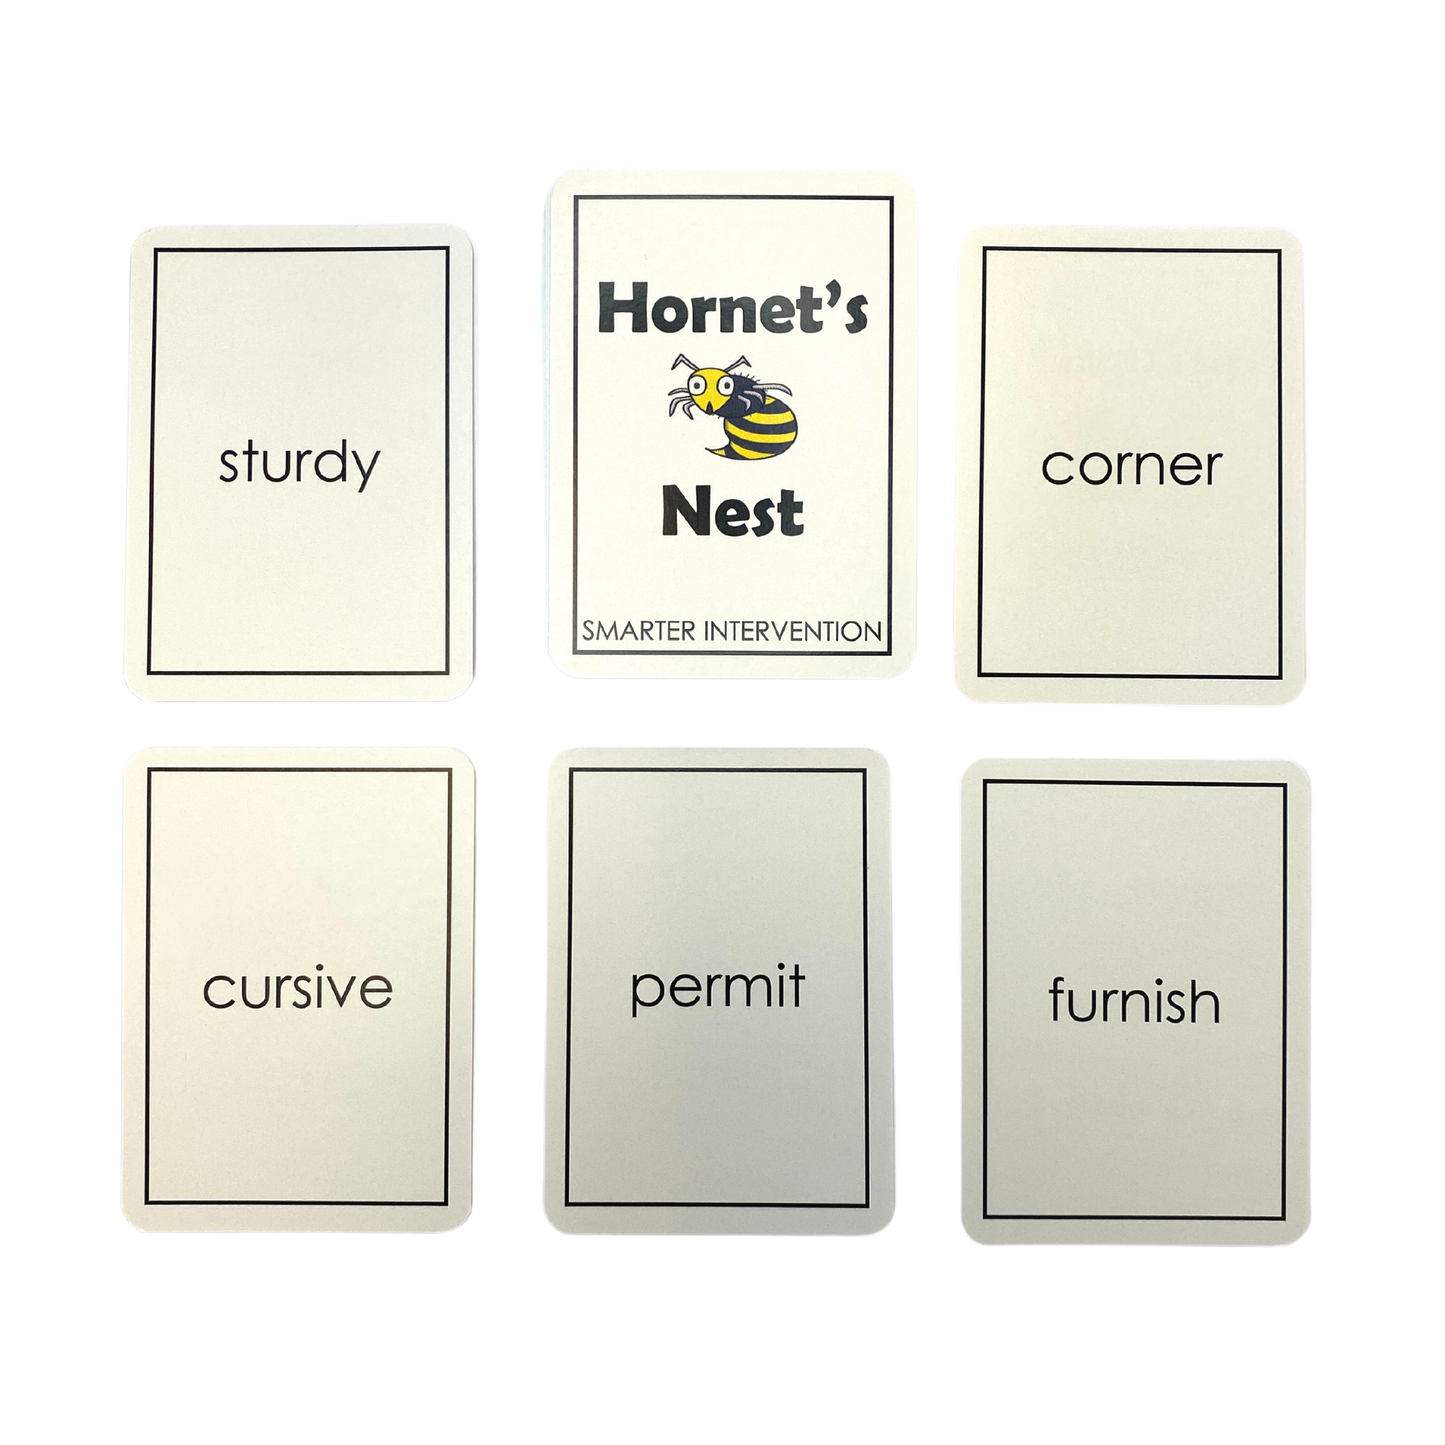 Use the Hornet Division game cards as a syllable division review drill in small group interventions or as a literacy center activity. This game helps students strengthen their reading skills, build their vocabulary, and improve their comprehension in a fun and interactive way. It is designed to reinforce key concepts in a way that is engaging and memorable.